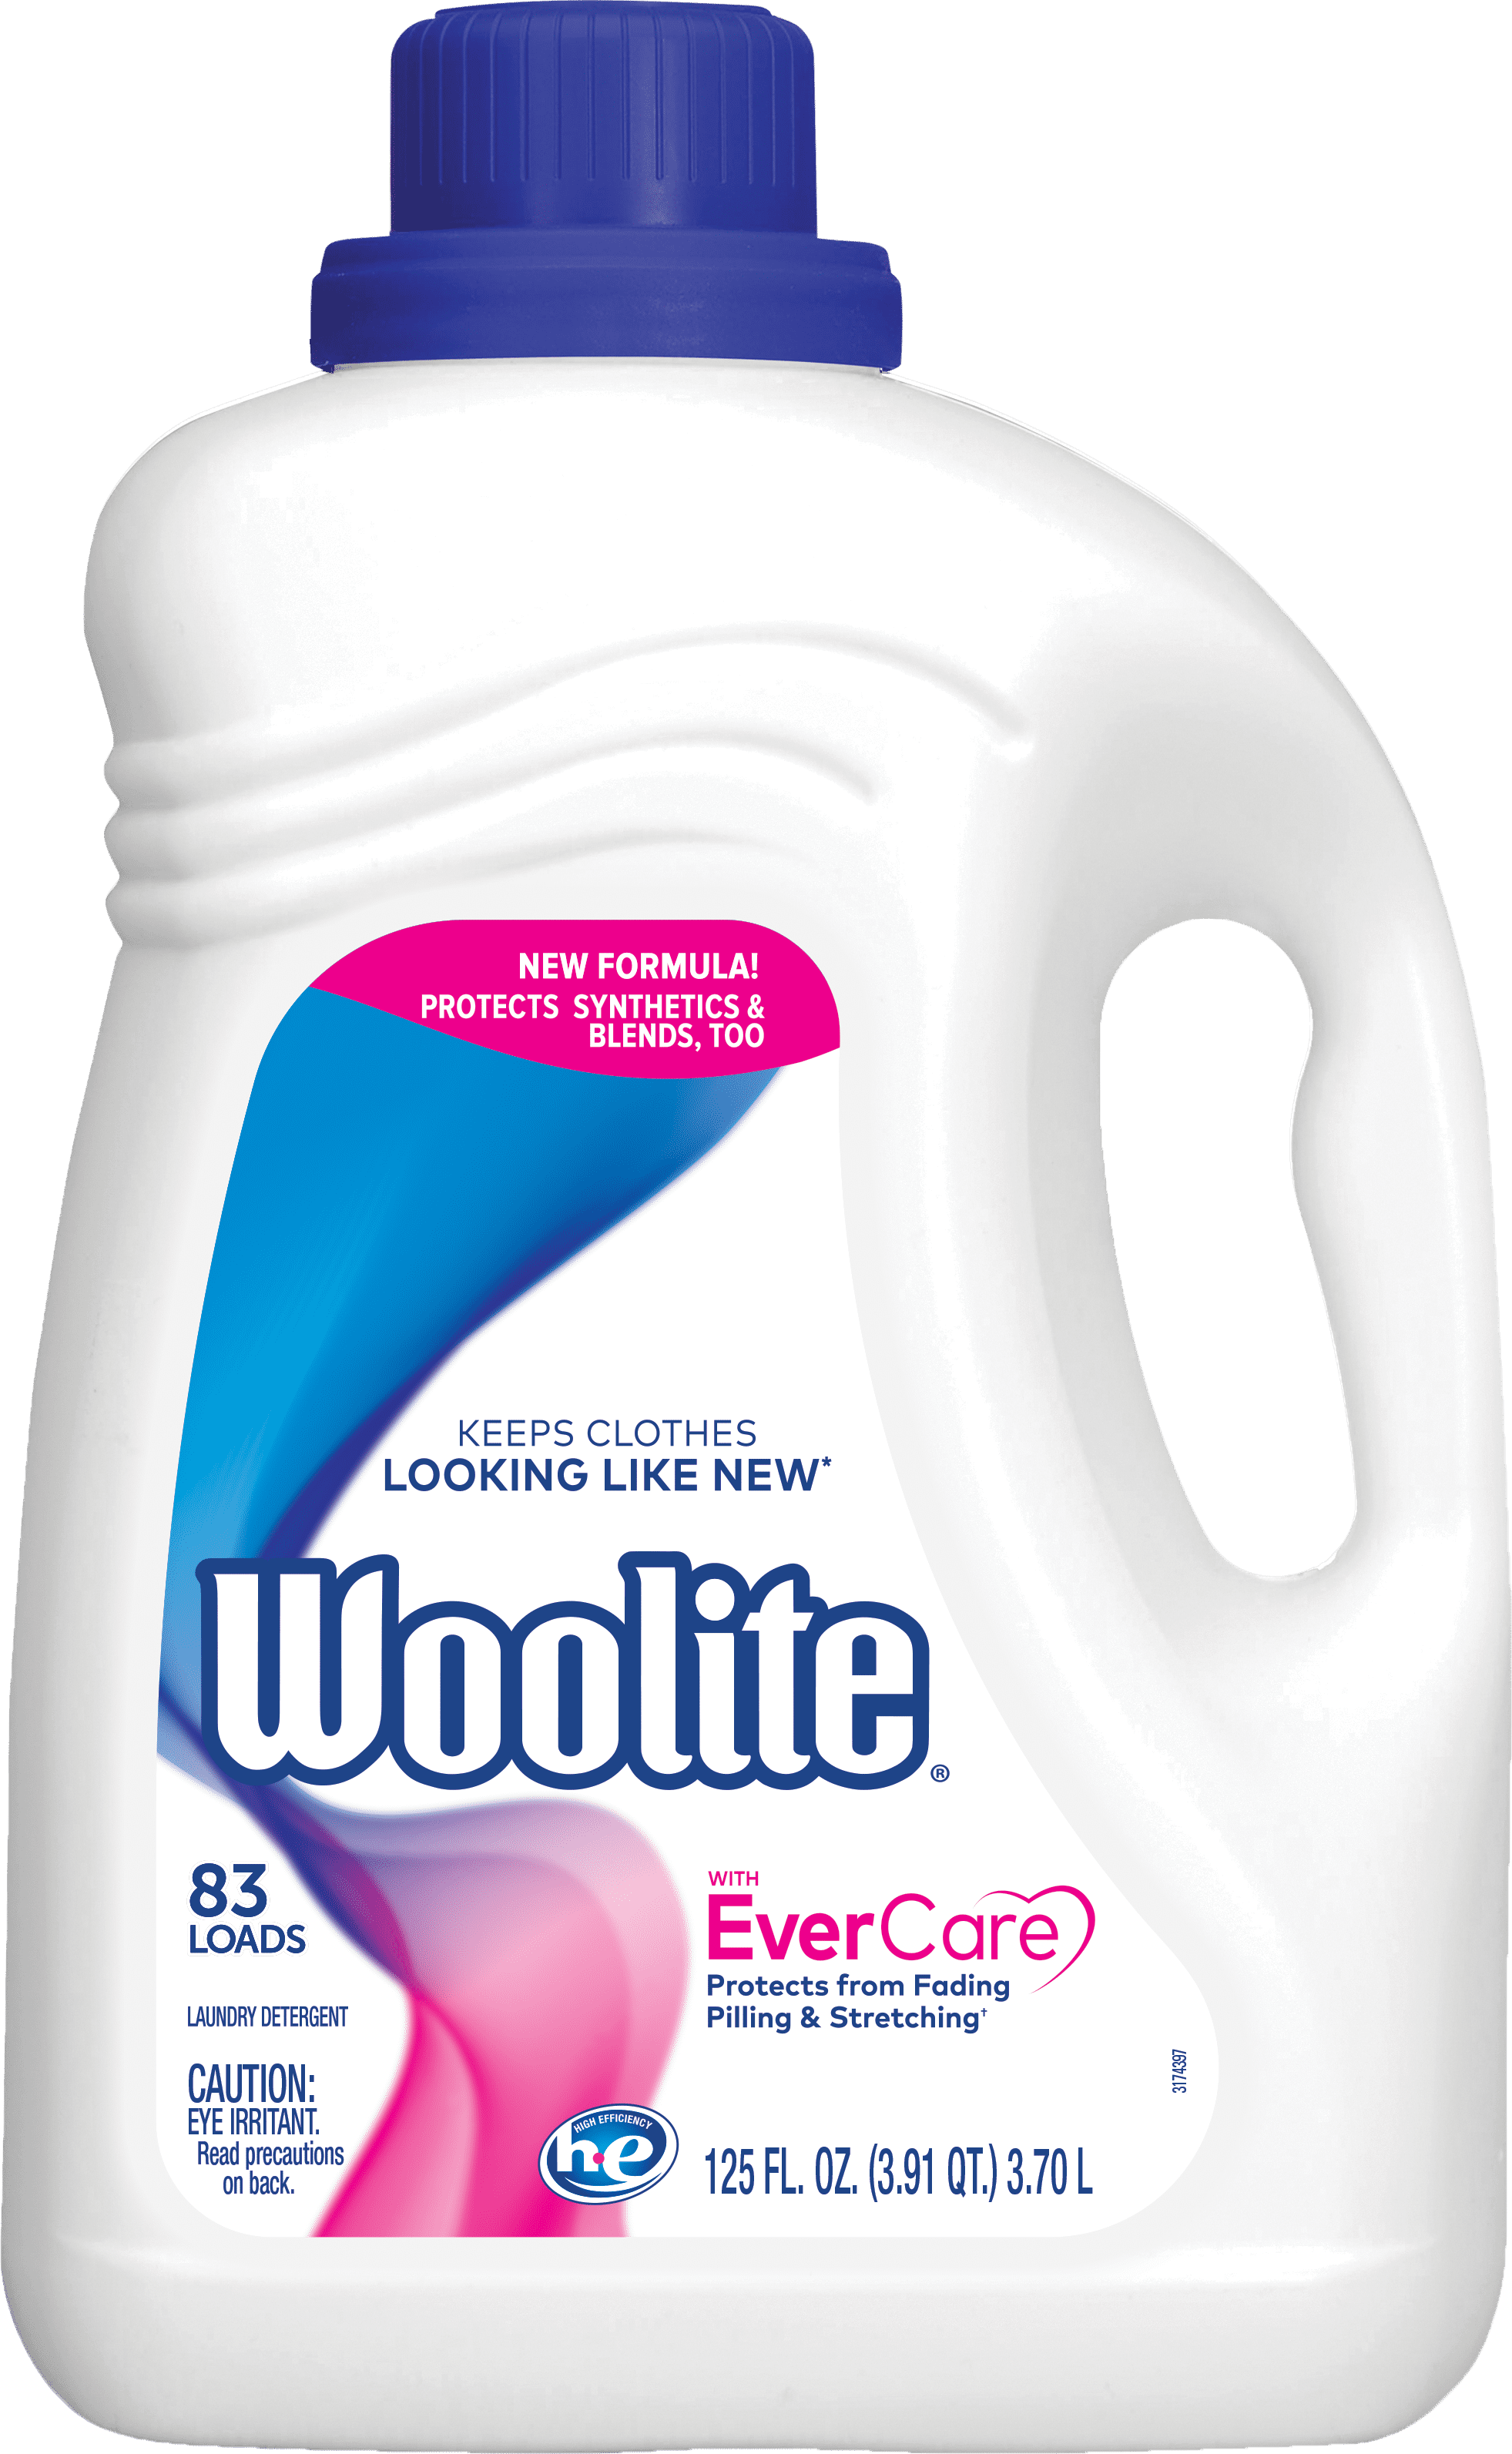 Woolite Clean HE Laundry Detergent (72-fl oz) at